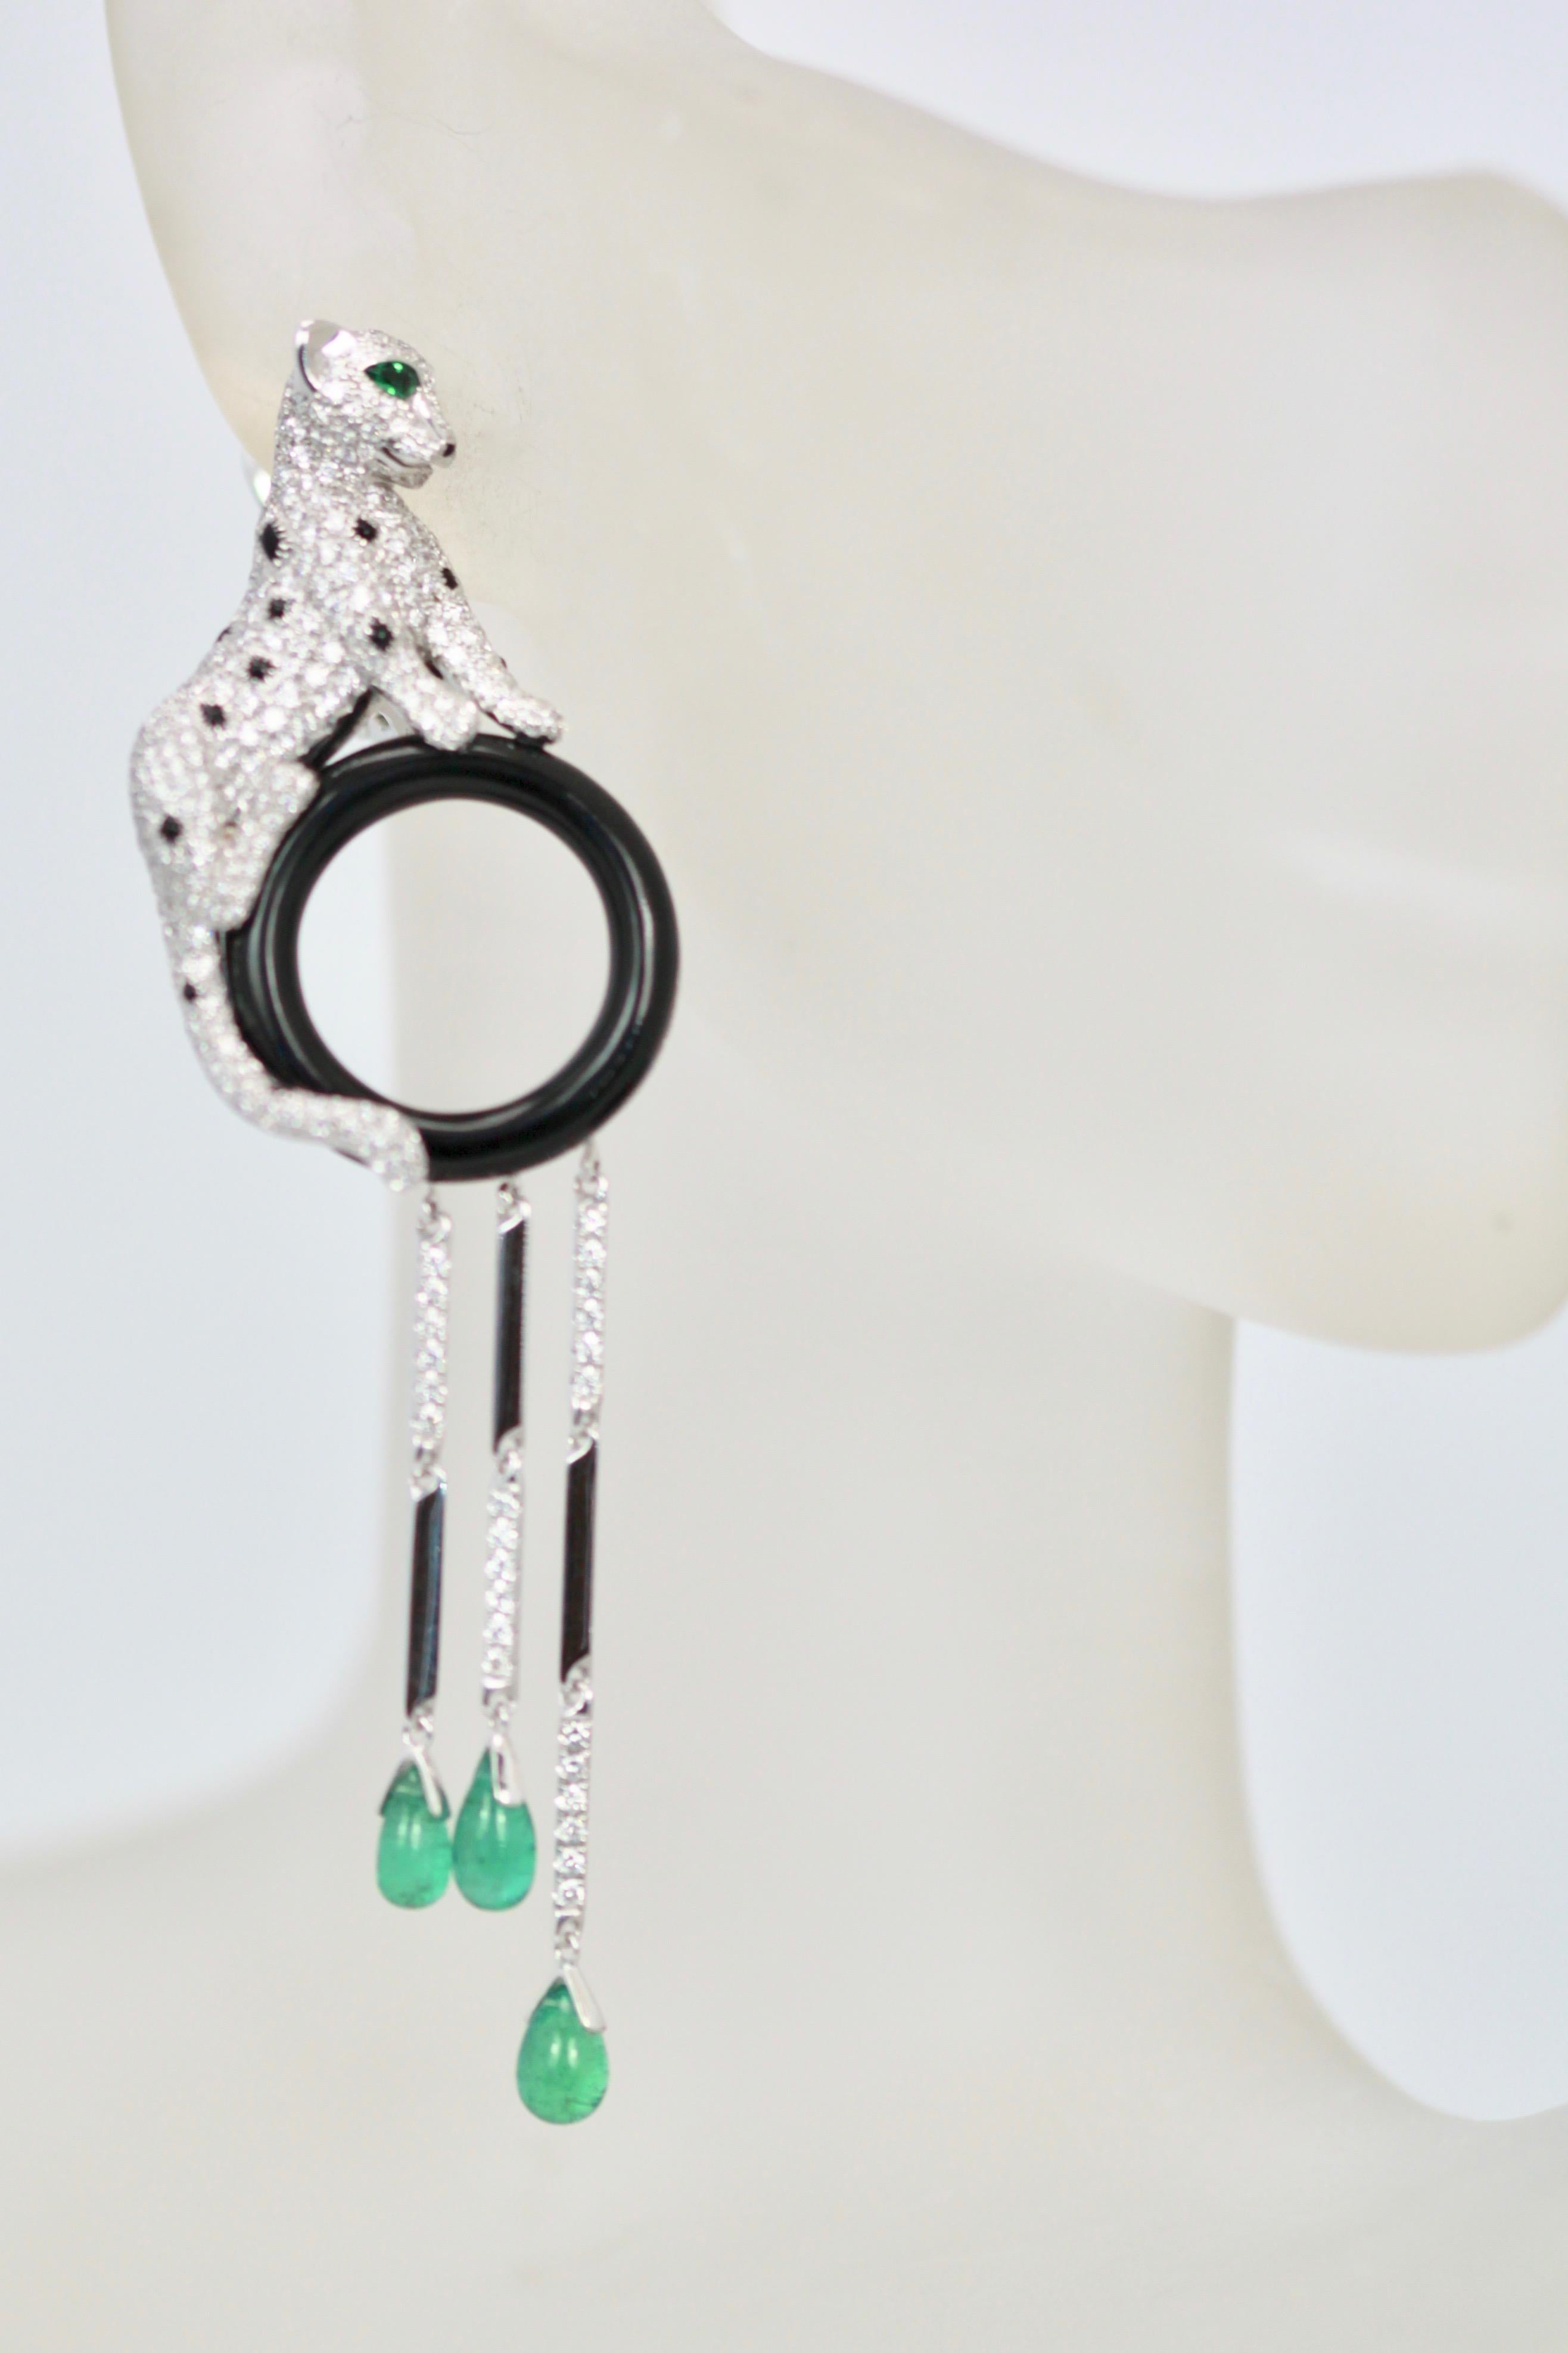 Round Cut Cartier Diamond Panthere Earrings with Onyx and Emeralds 18K